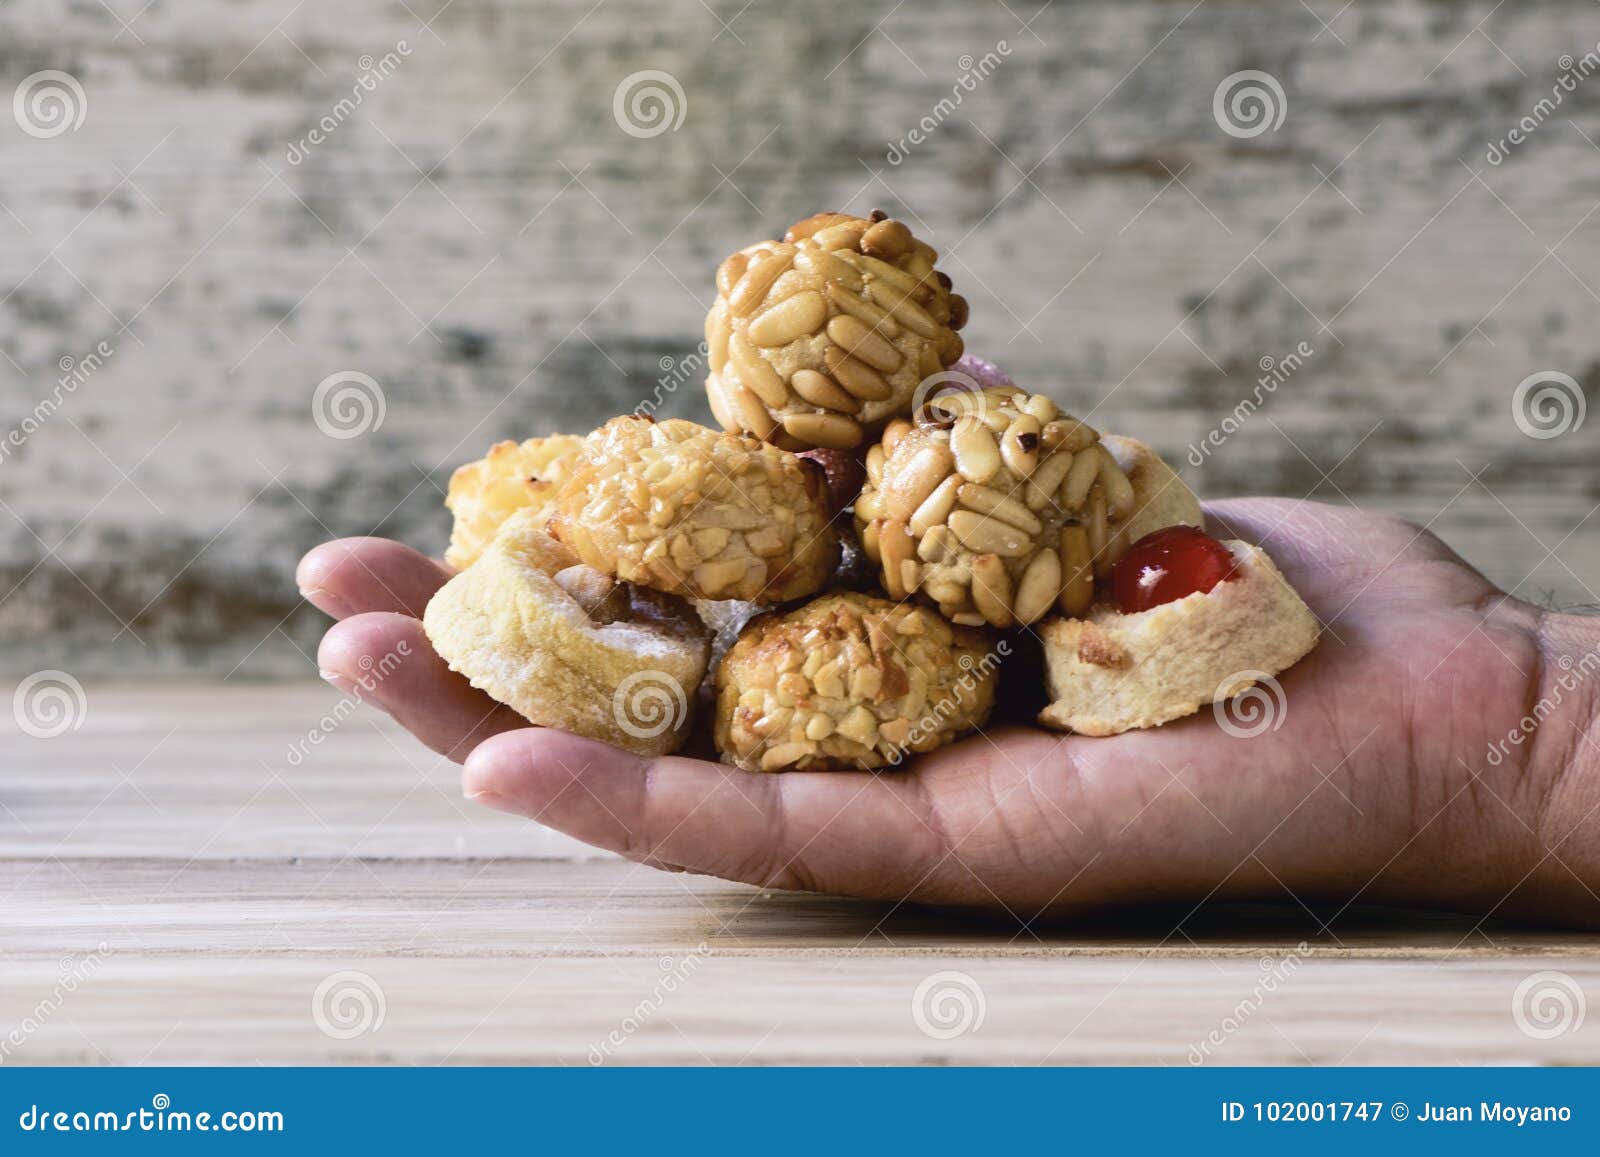 panellets, typical confection of catalonia, spain